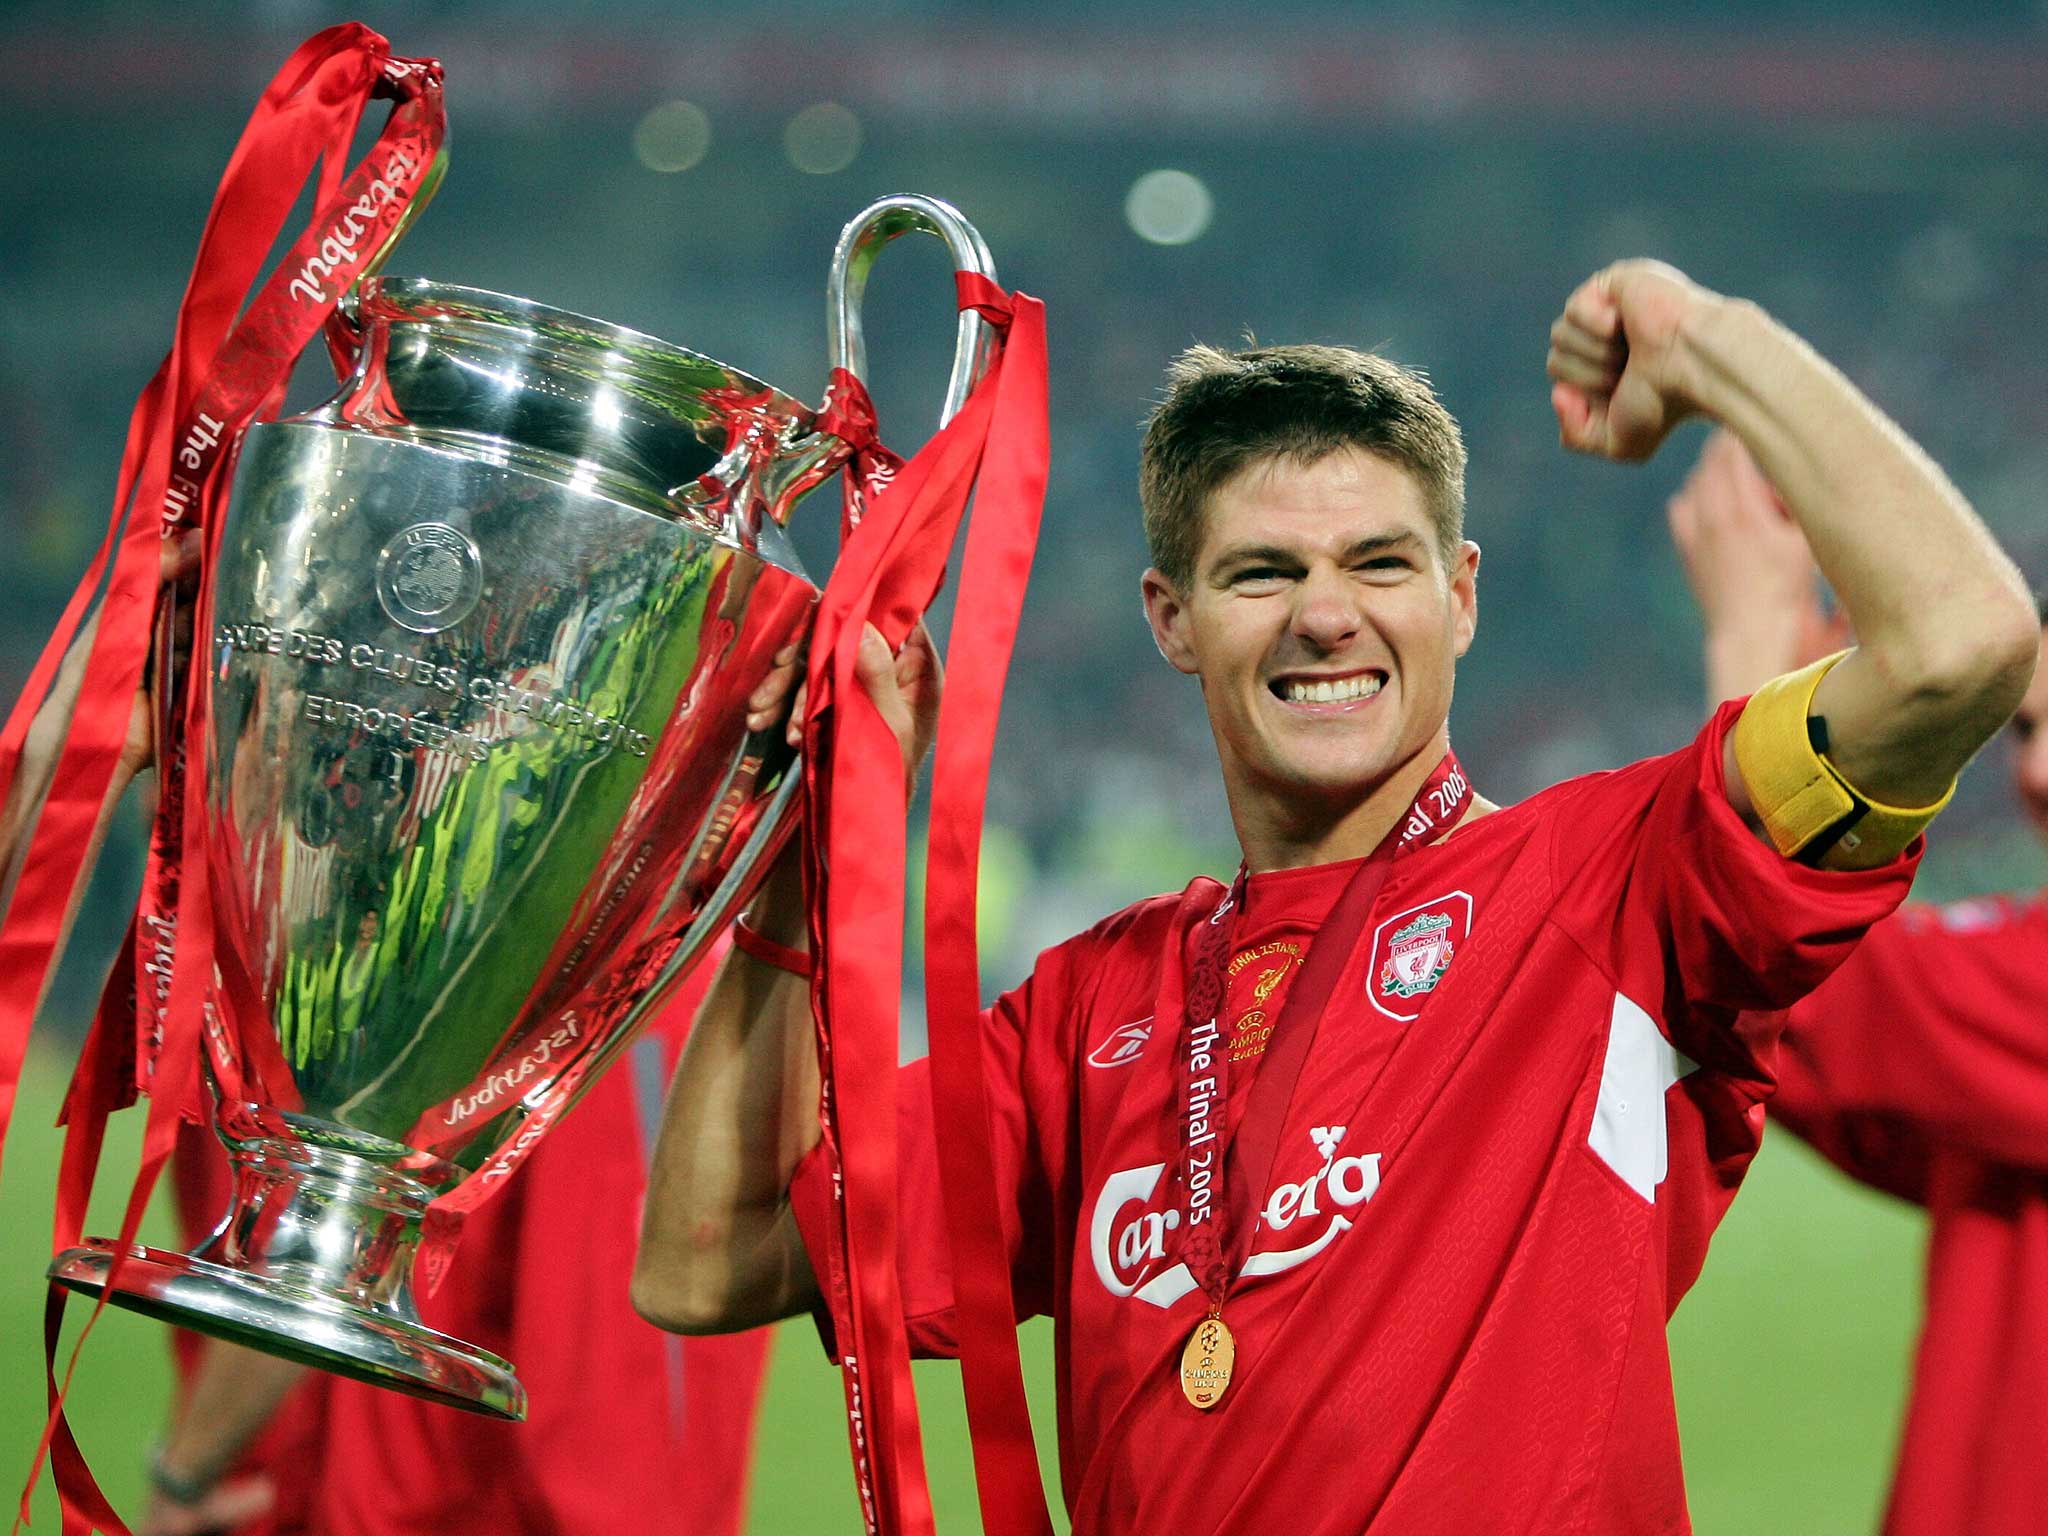 Gerrard celebrating winning the Champions League Cup in 2005